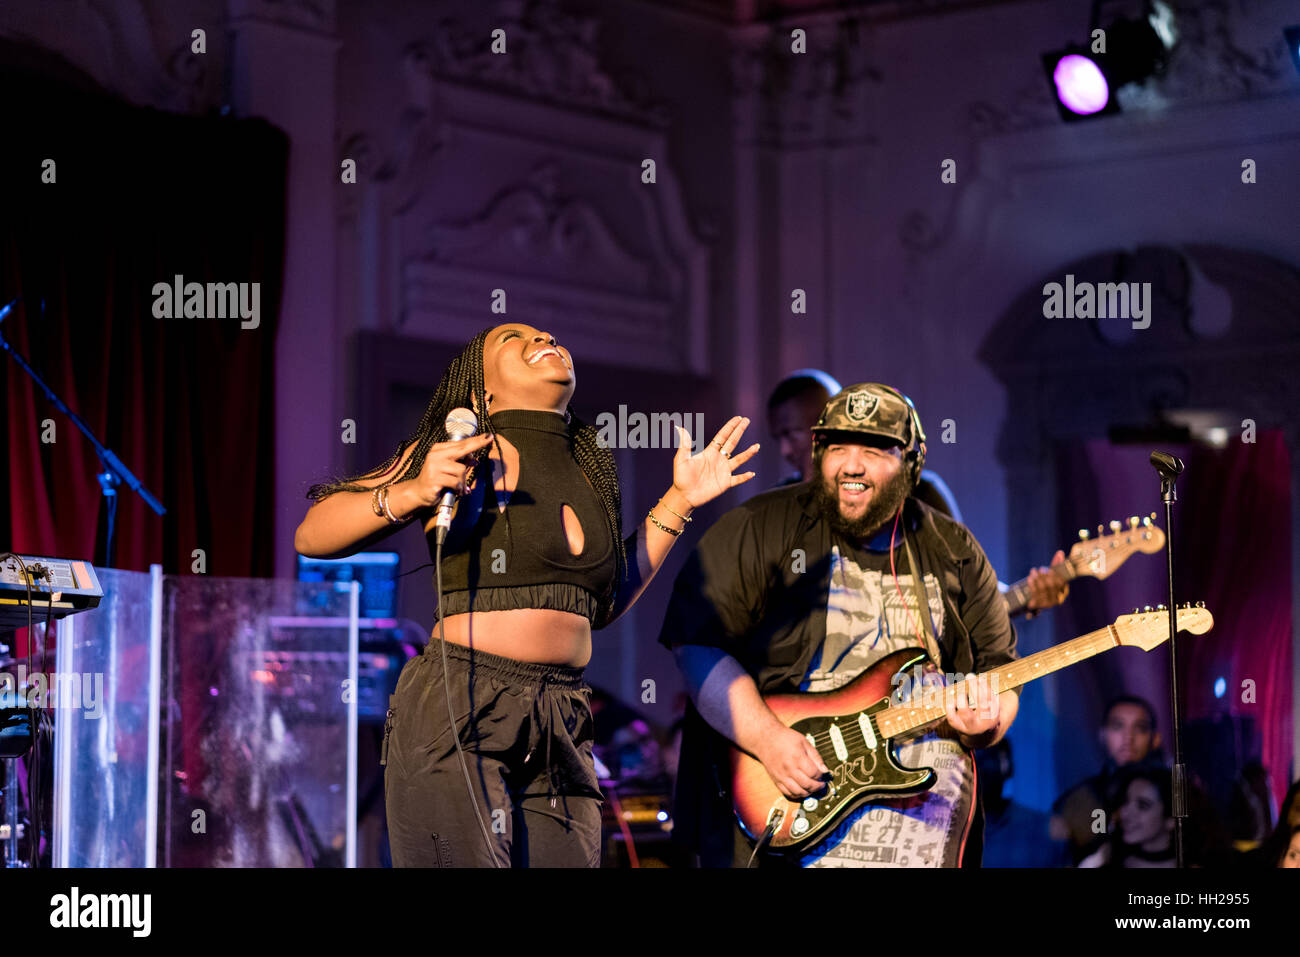 Ray BLK, singer, interacting with her guitarist at a live concert in September 2016. Stock Photo